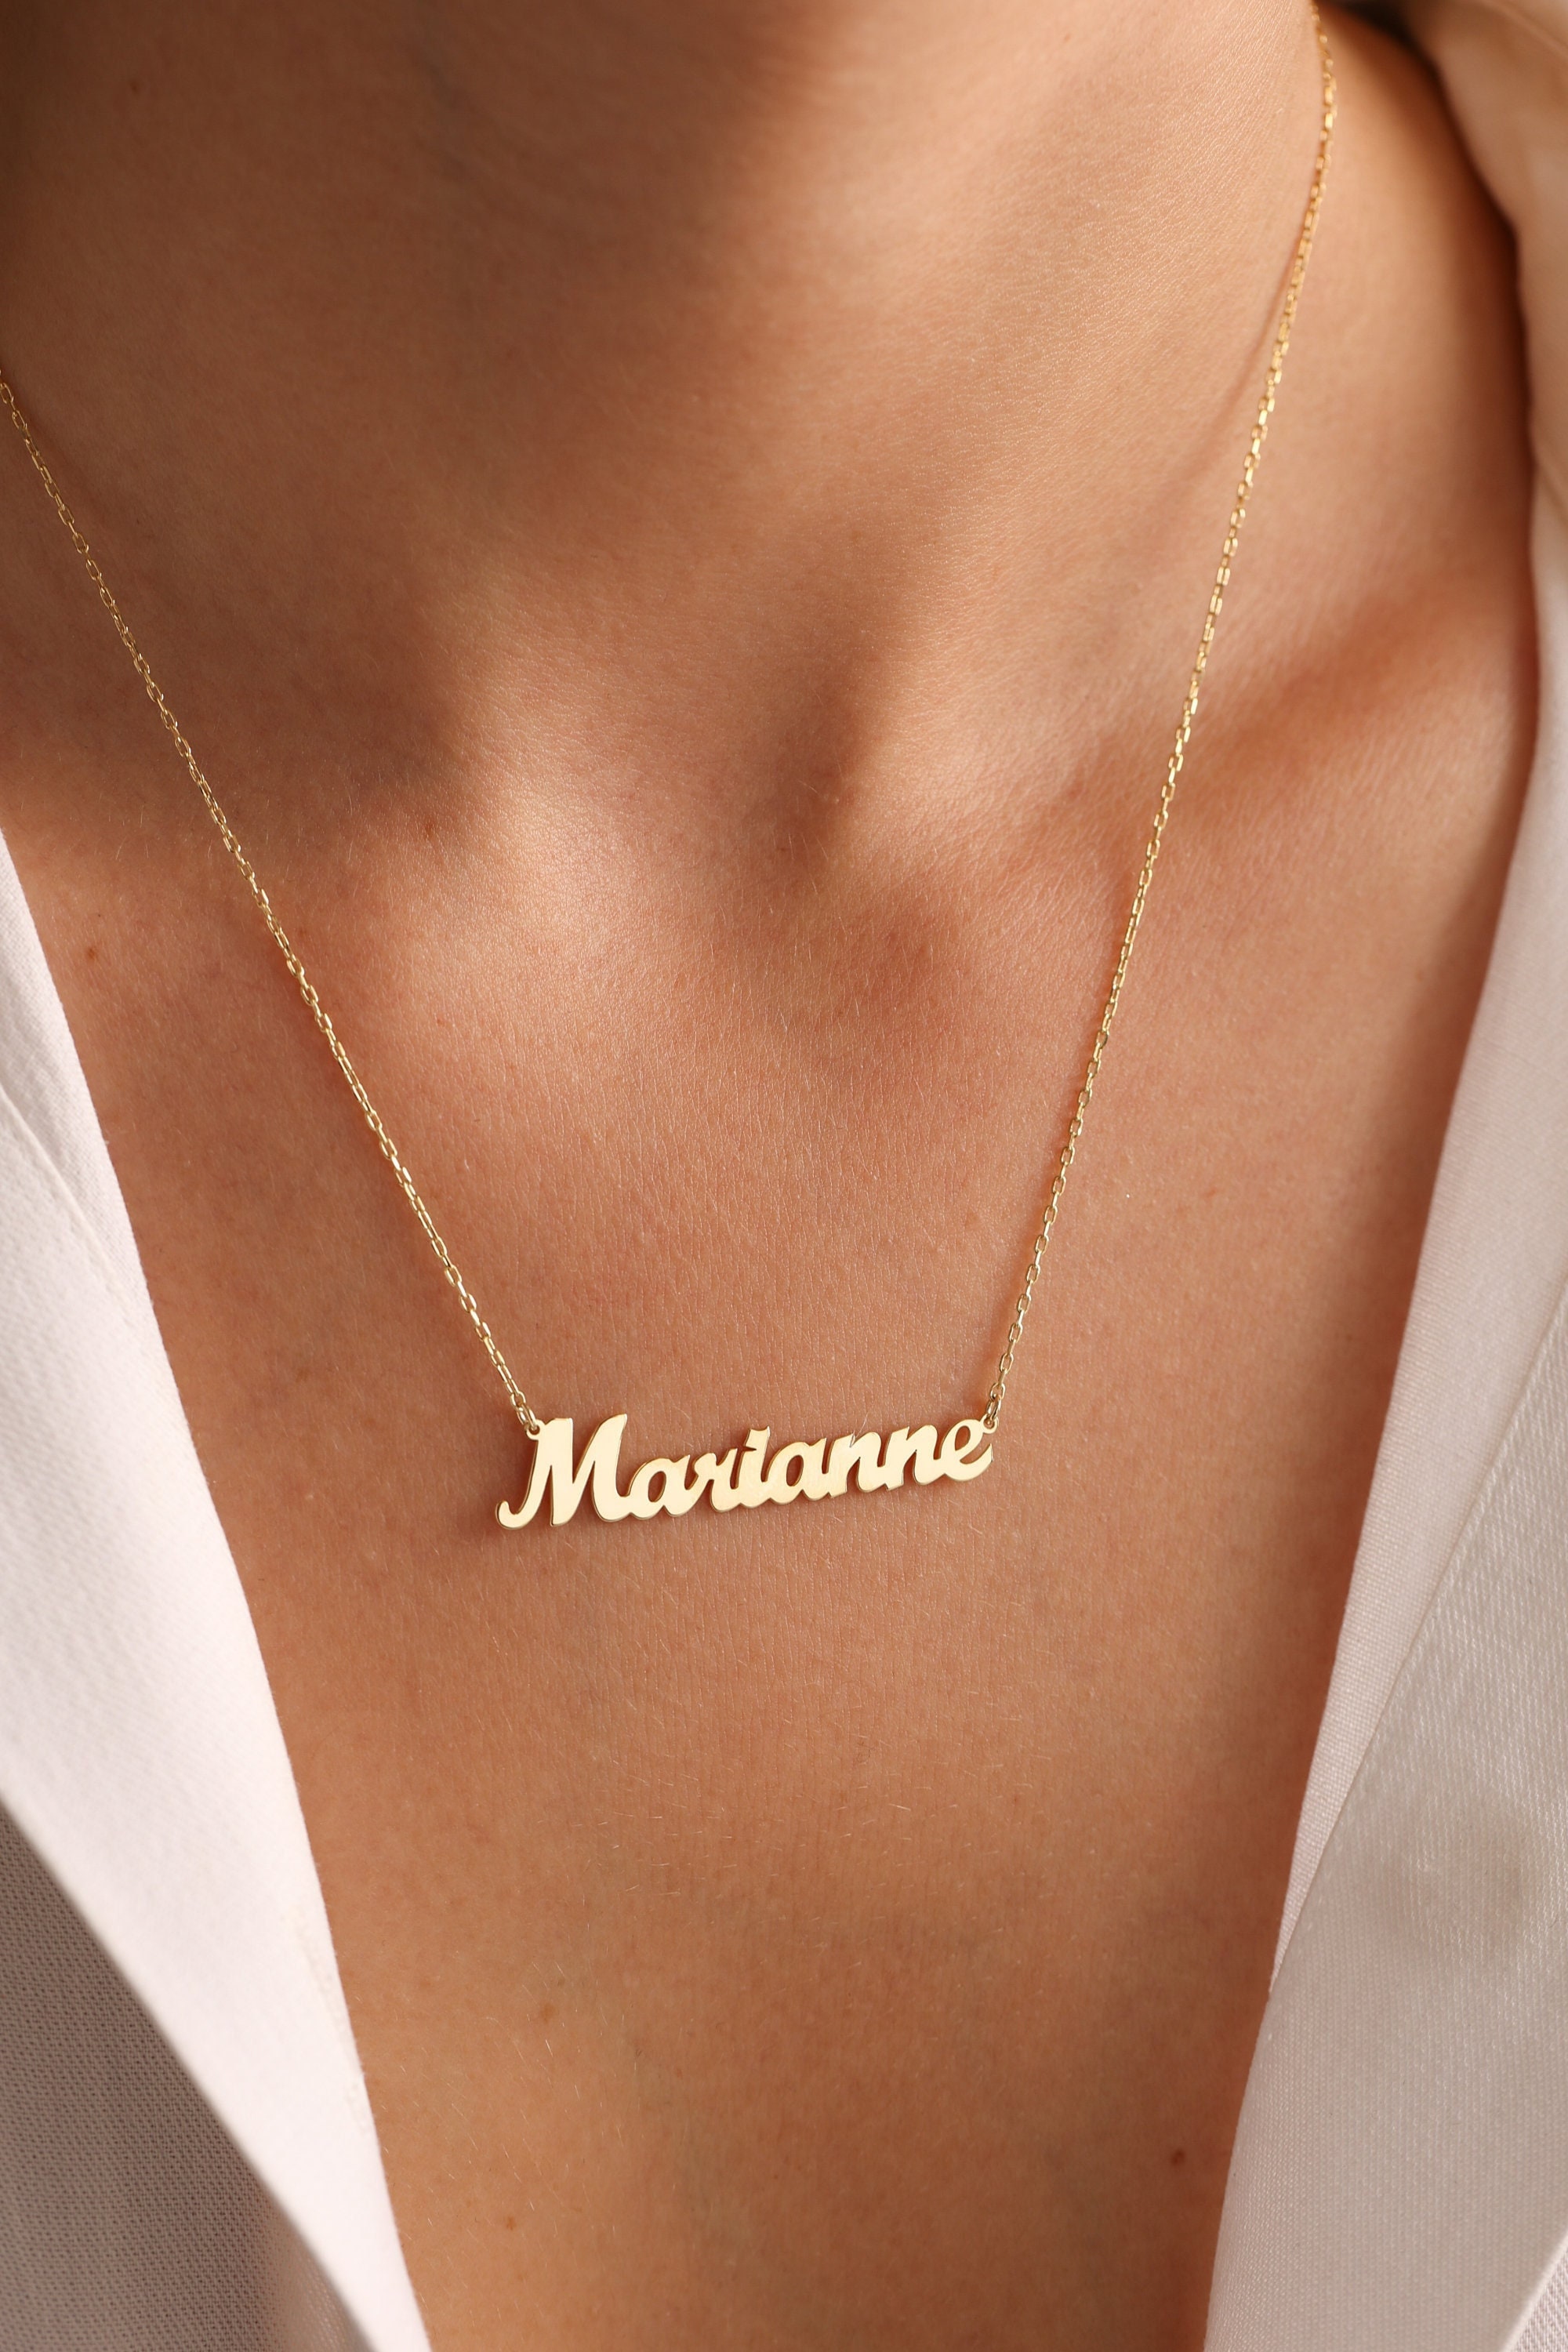 Nameplate Necklace -  Canada